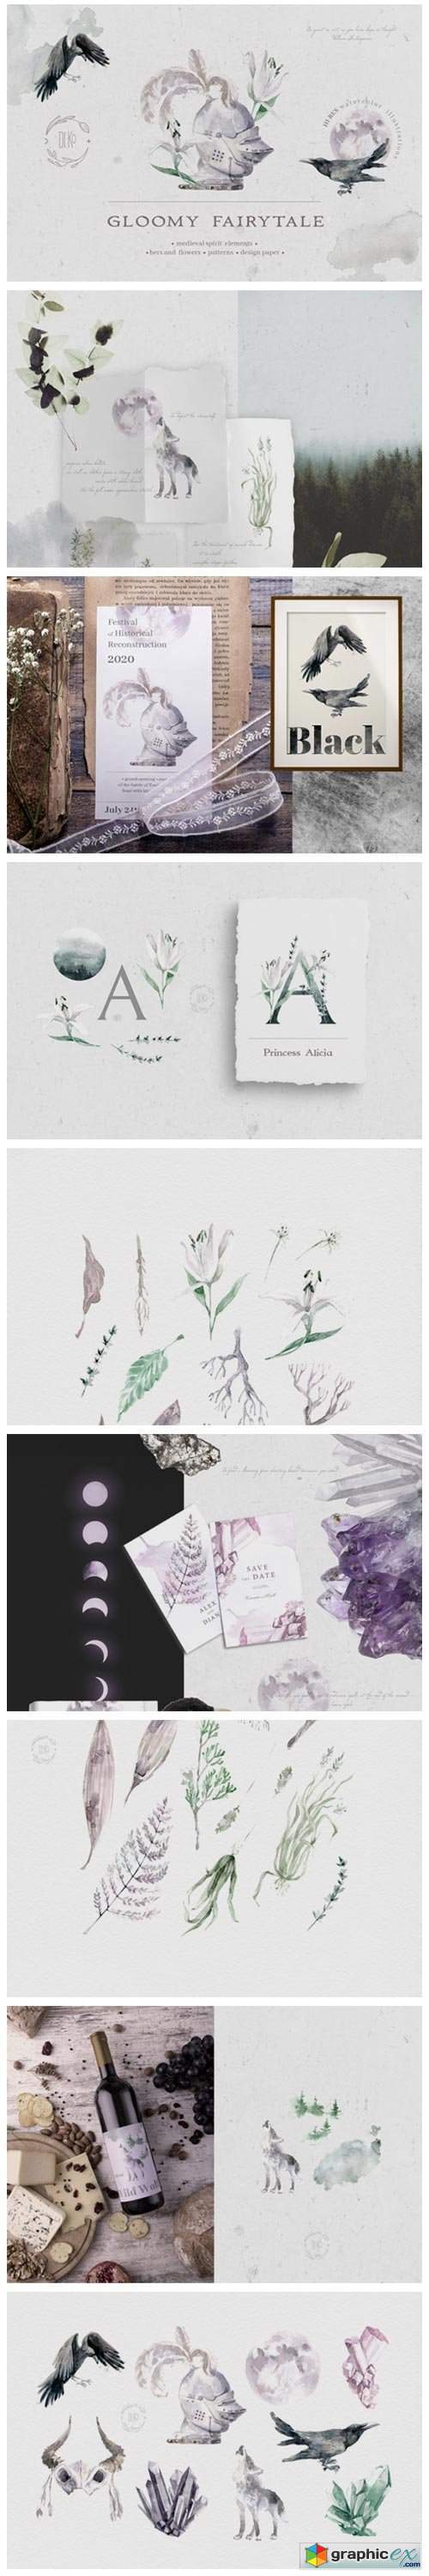 Gloomy Fairytale Graphic Collection